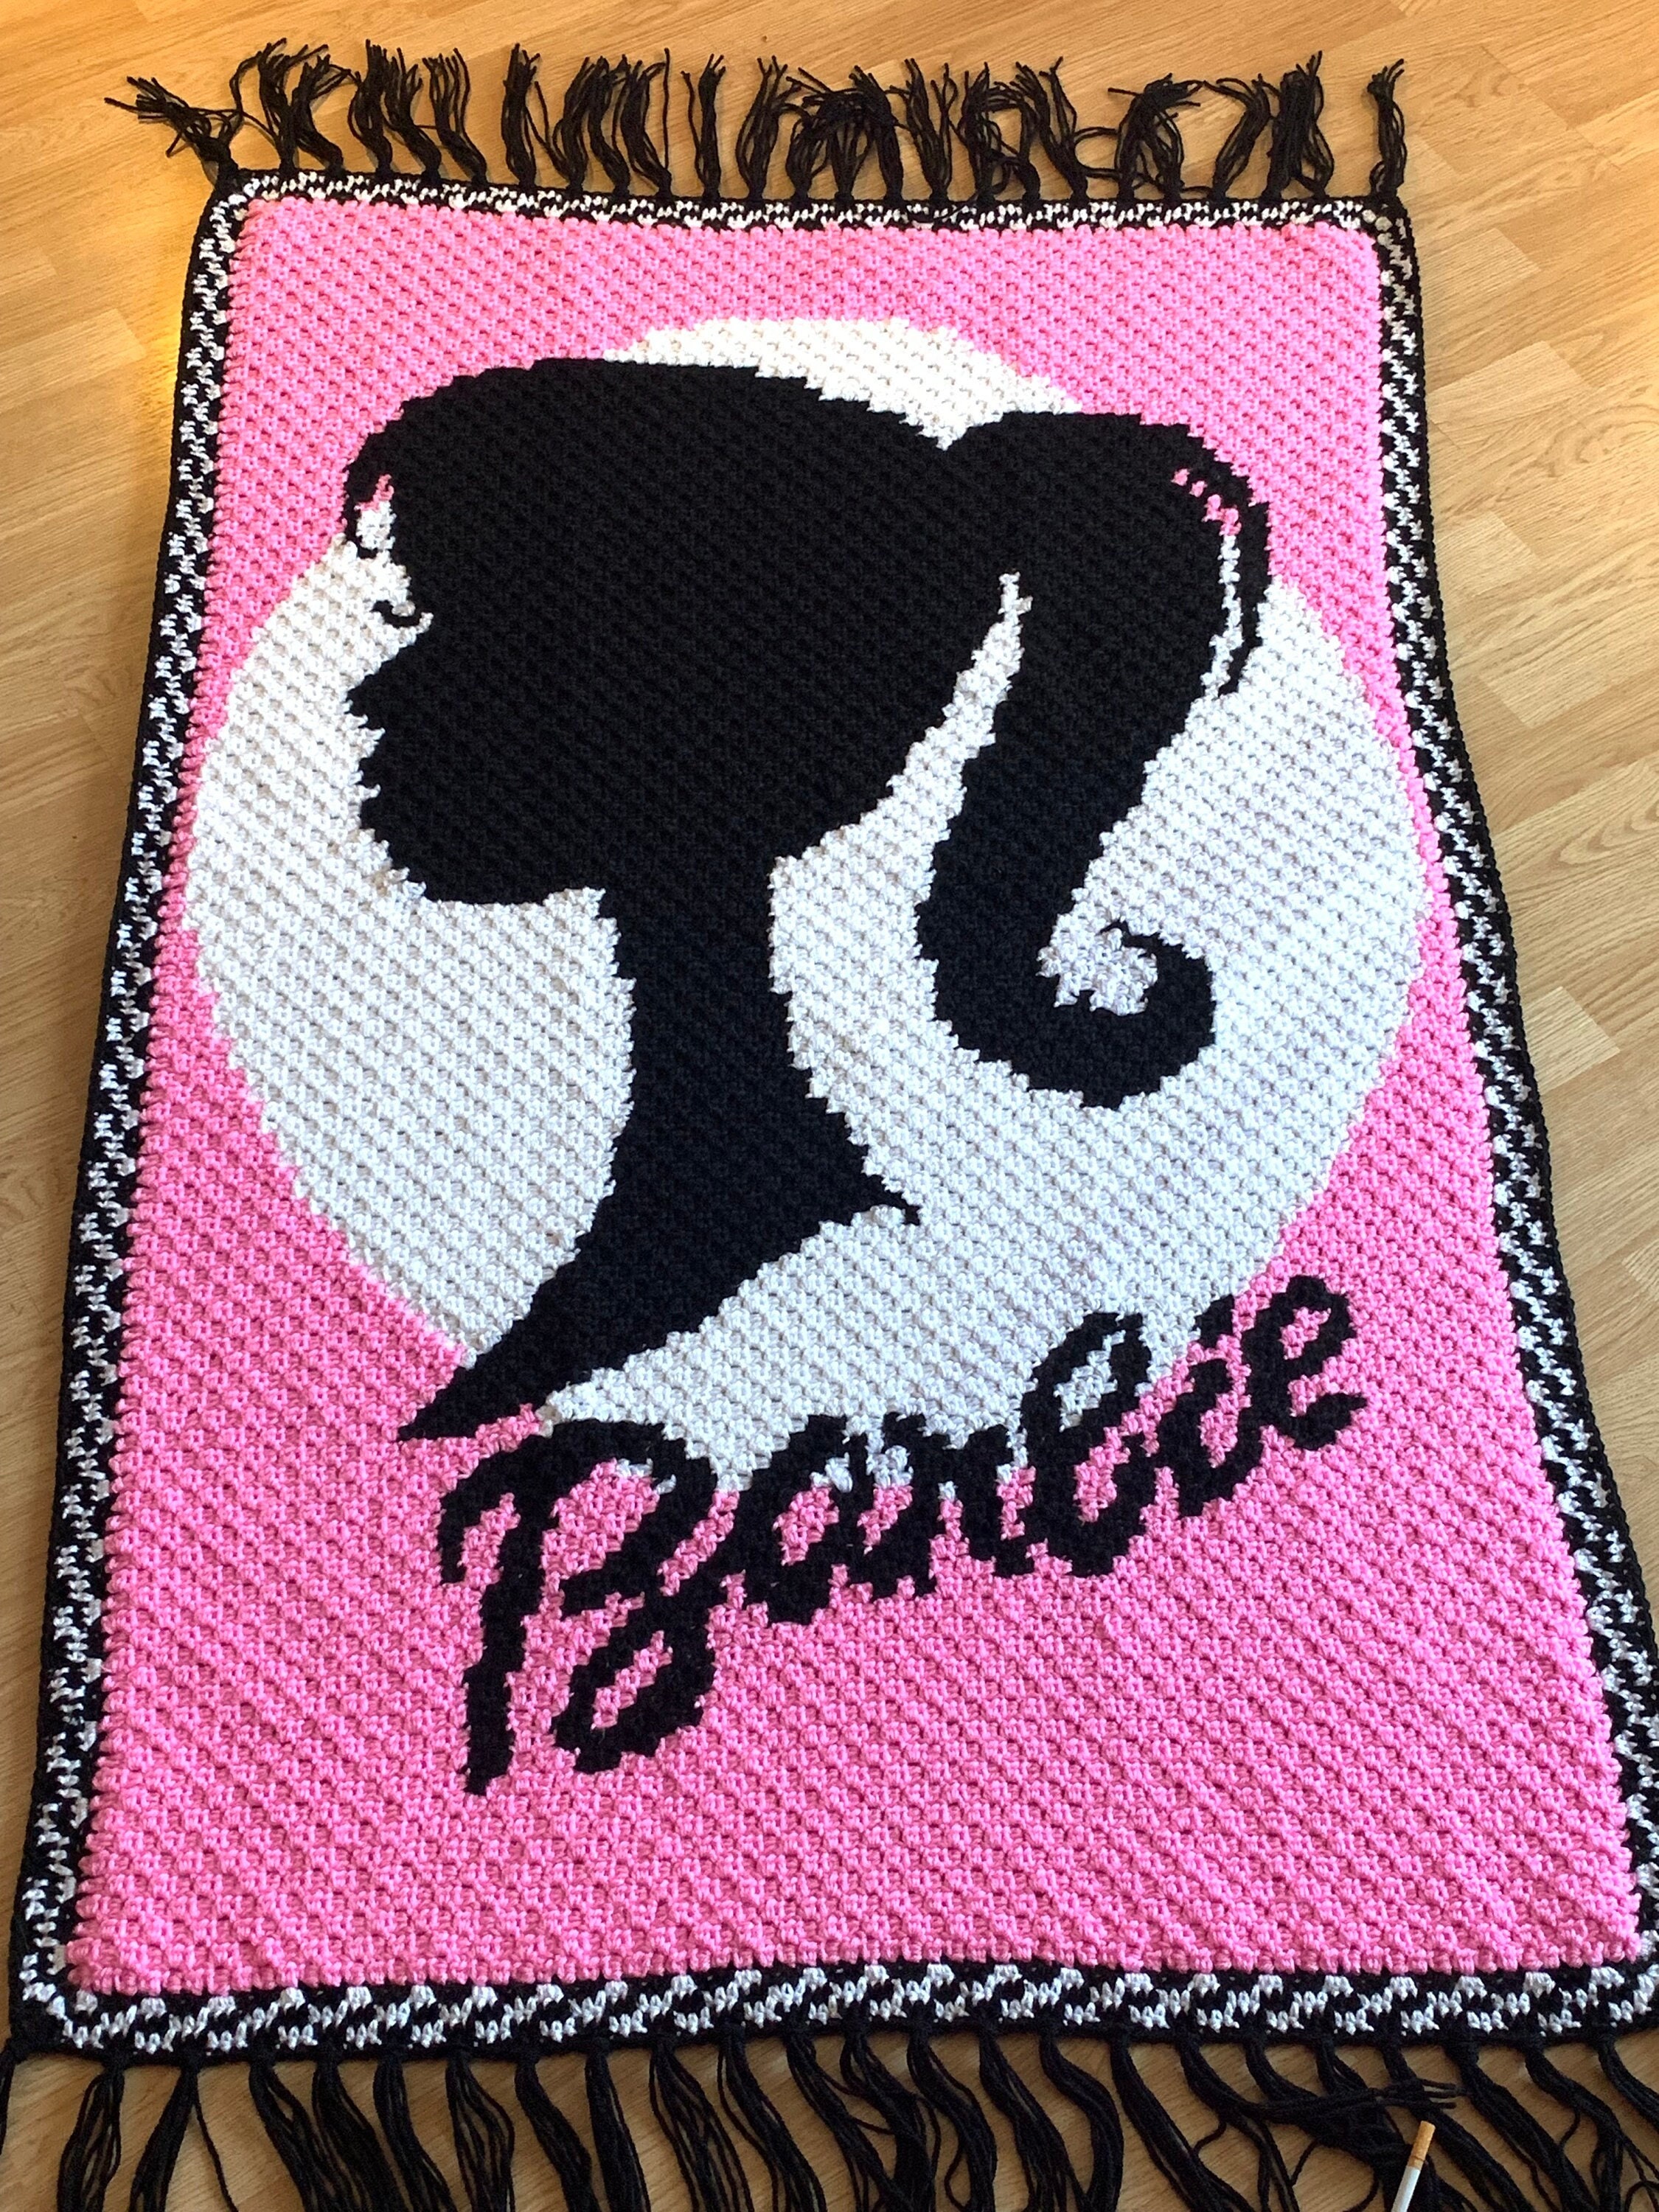 Barbie Silhouette Afghan Throw Blanket Pink, Black and White. 